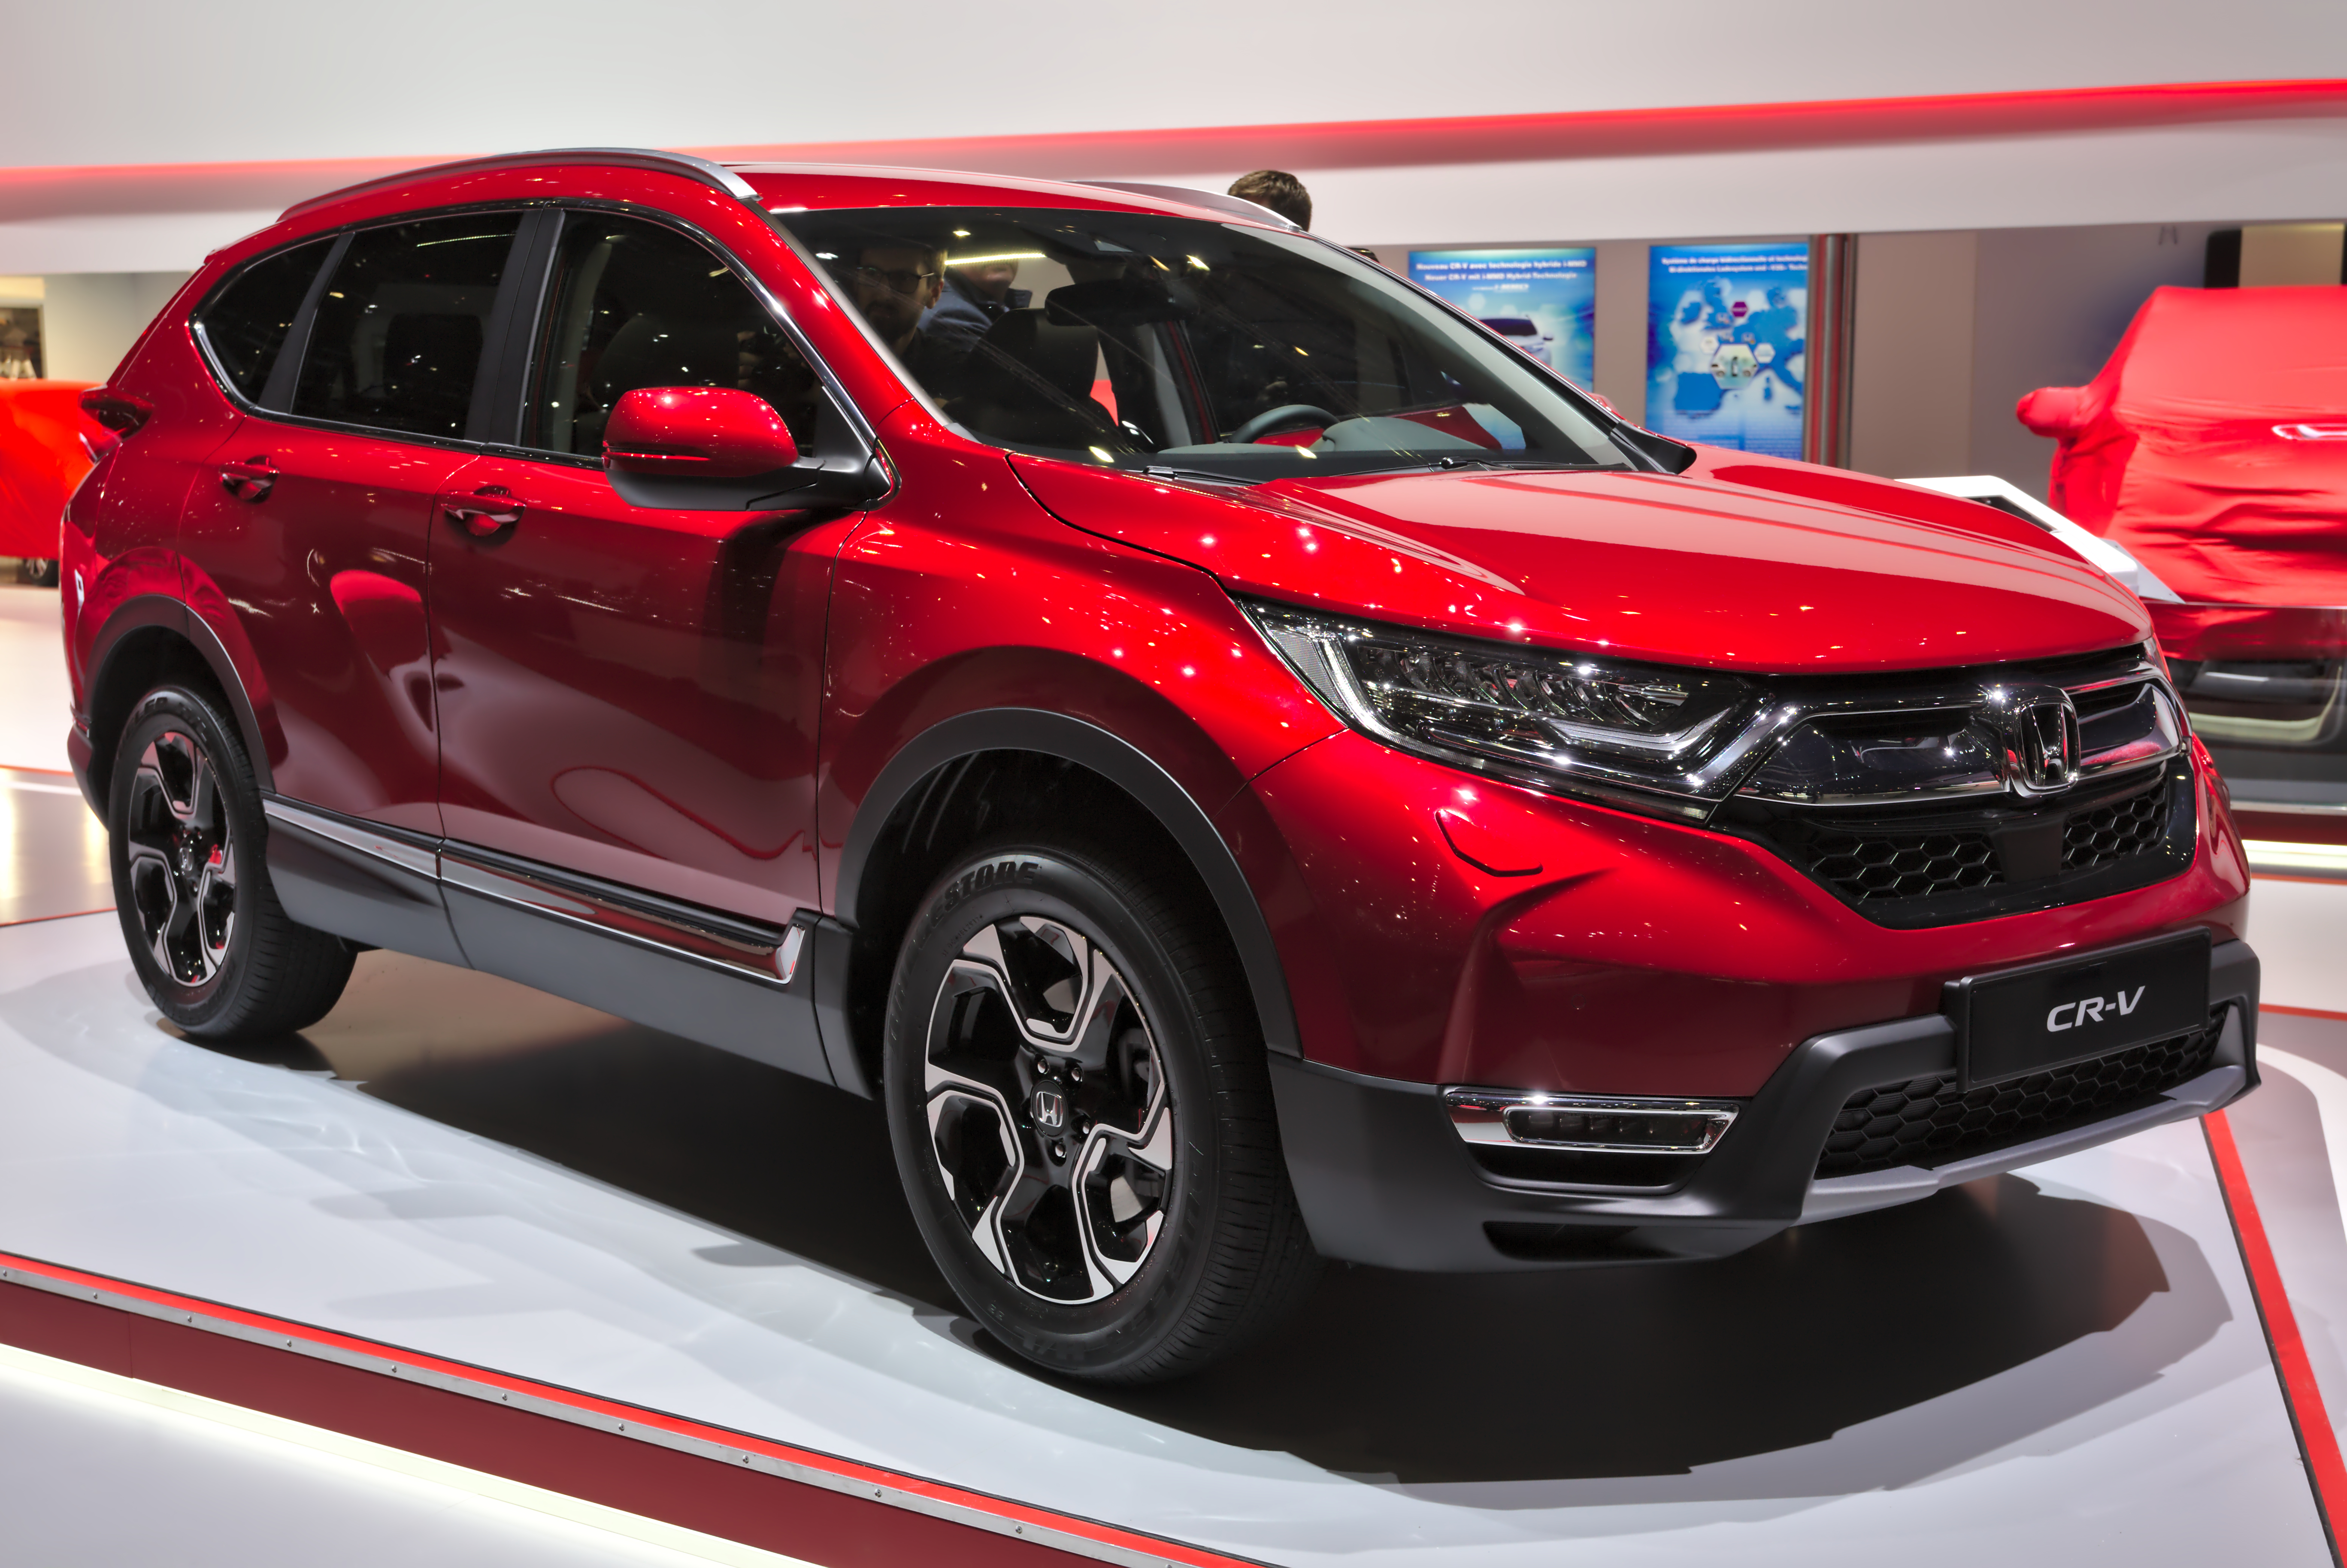 2018 Honda CRV Specifications, Pricing, Pictures and Videos